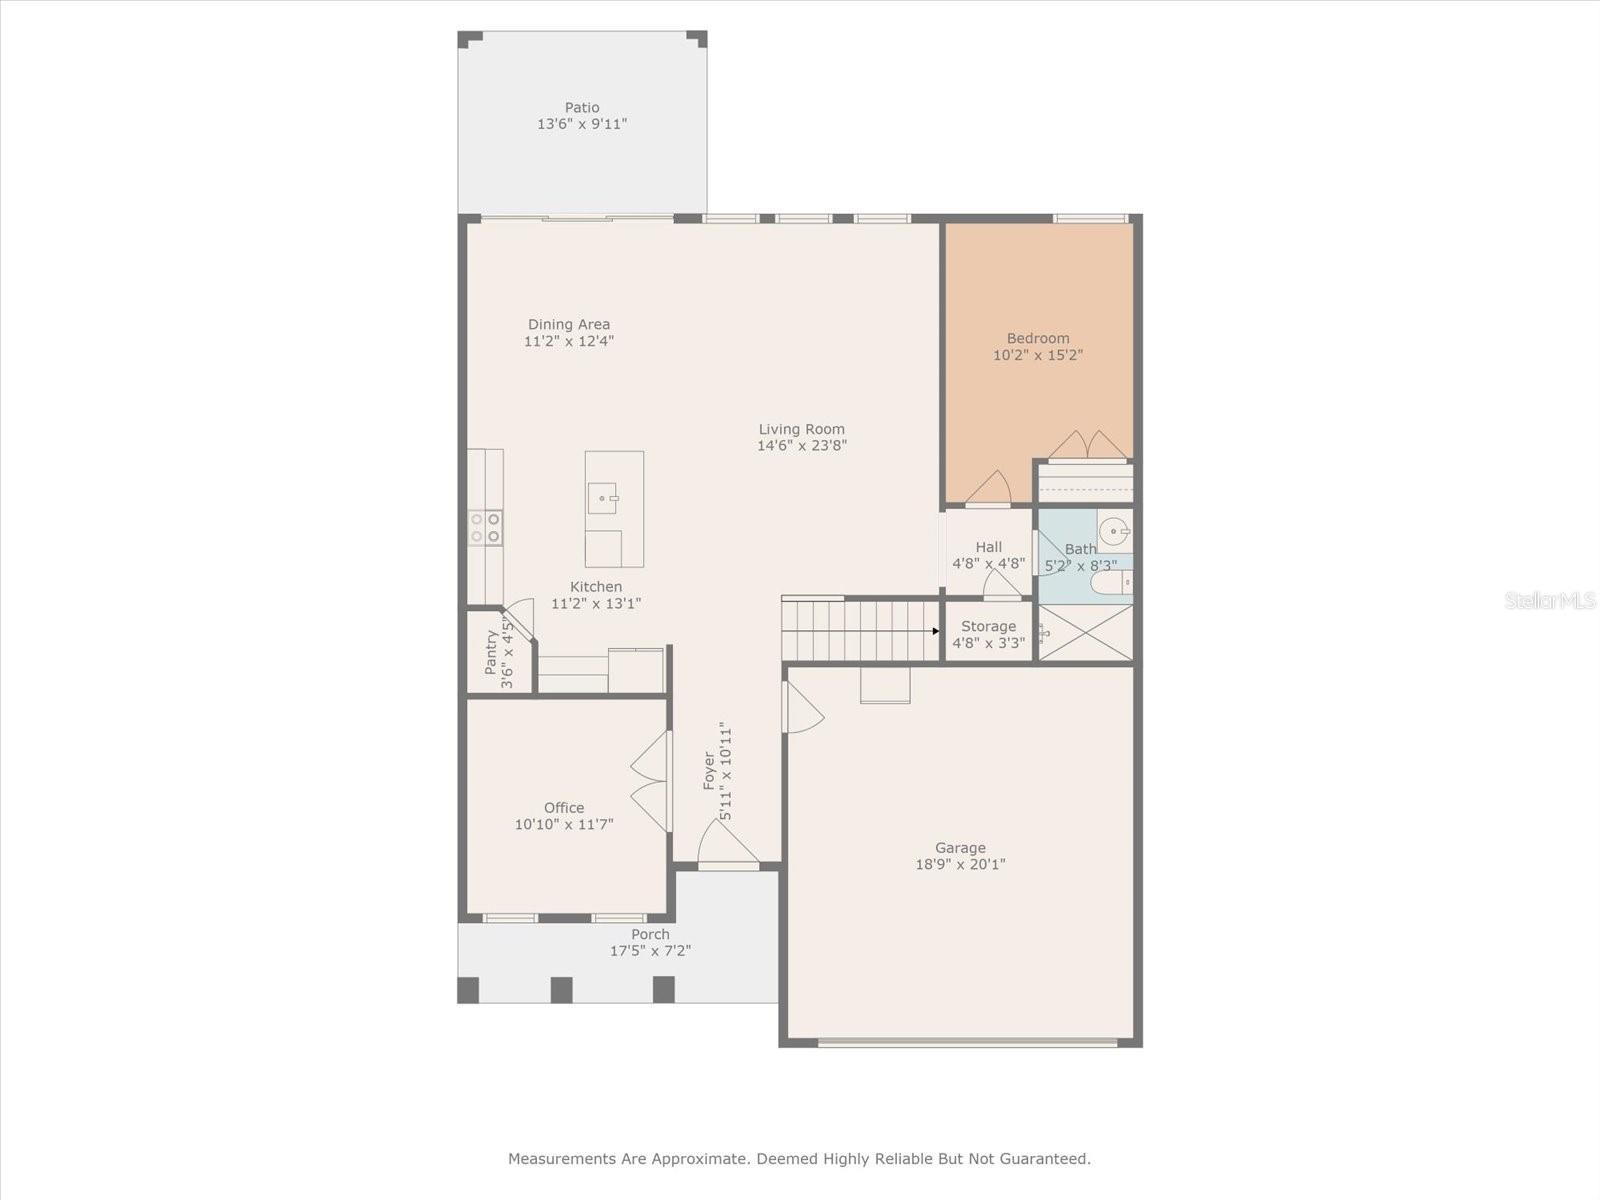 The second floor shows three bedrooms, two bathrooms, the laundry room, and the bonus room. Measurements to be verified by the buyer.